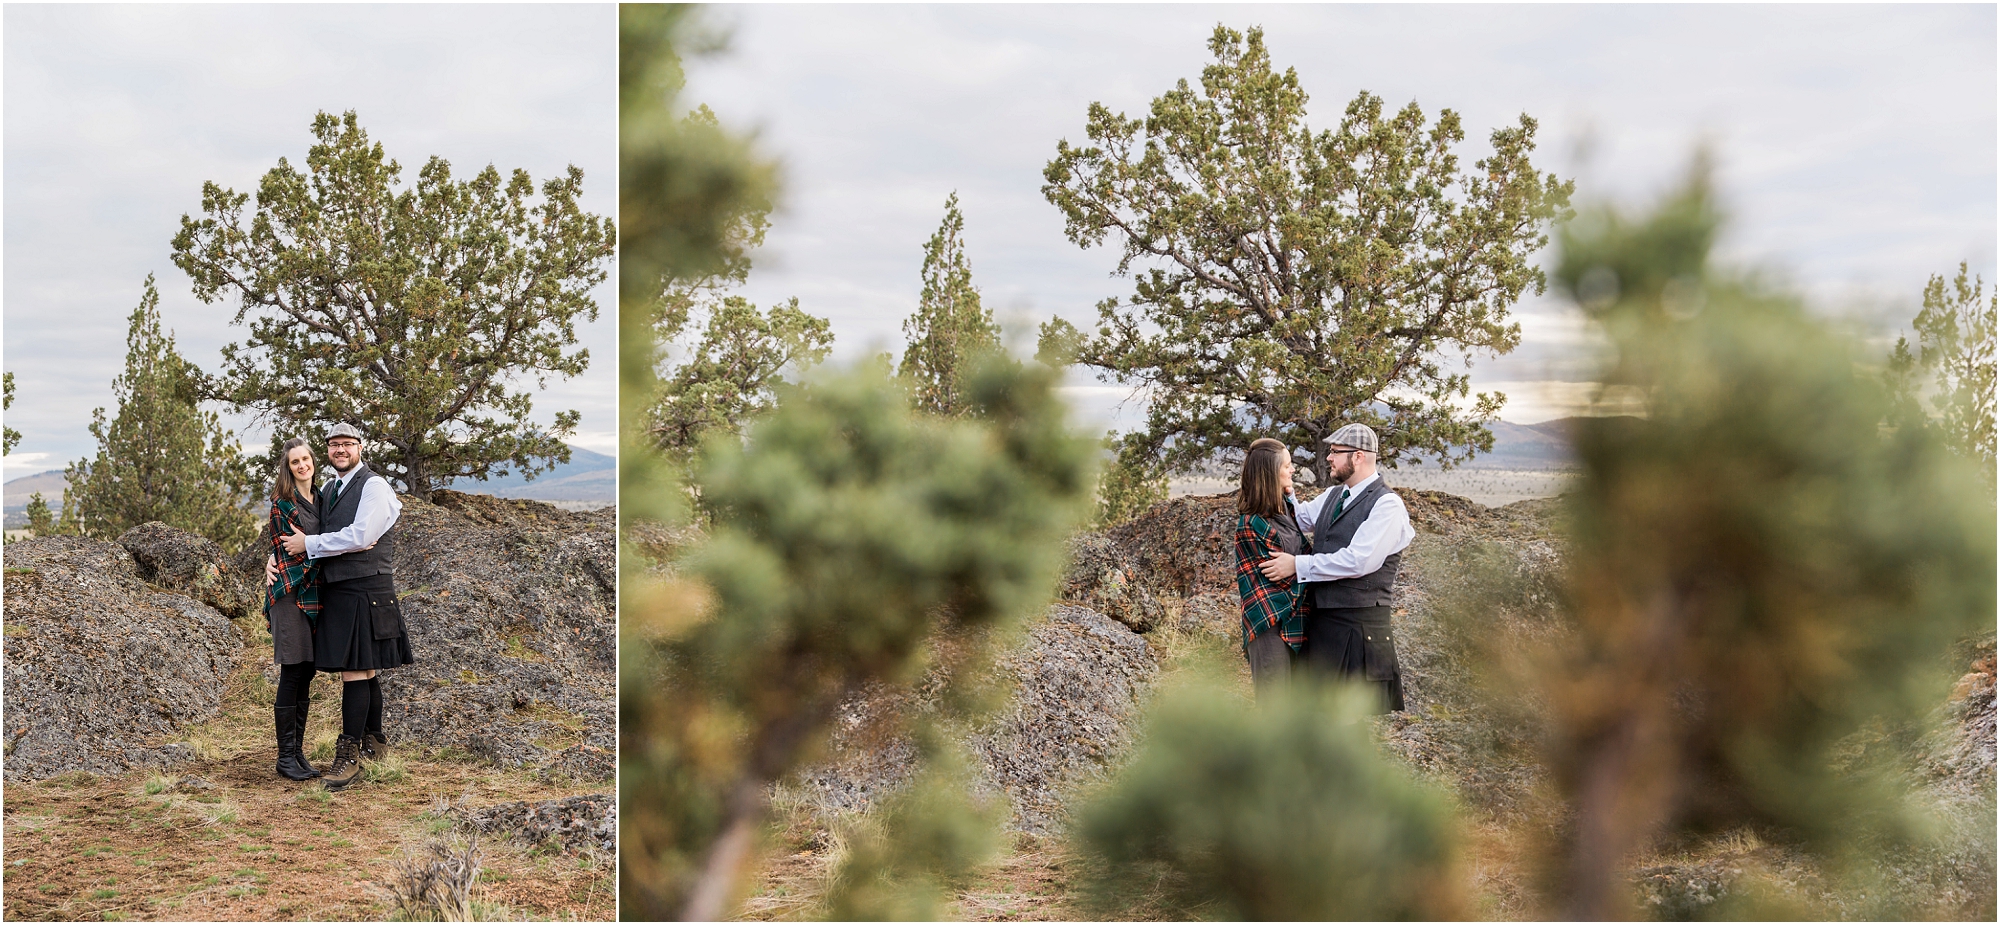 The desert junipers are such a beautiful part of an Oregon desert engagement session near Bend. | Erica Swantek Photography